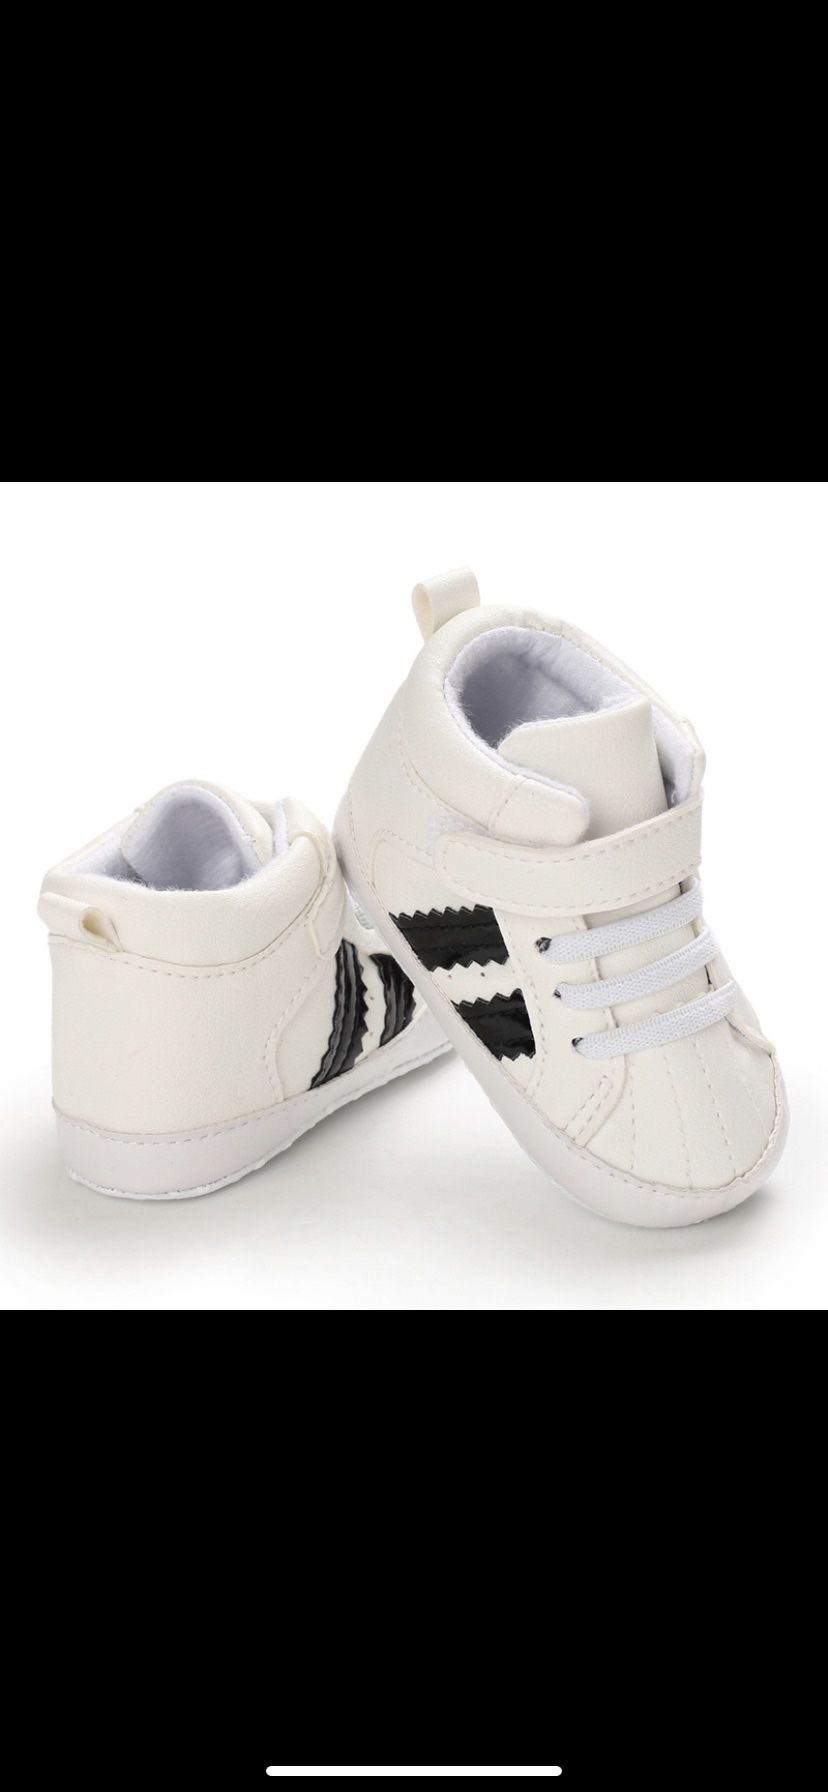 Baby Boy New Crib Shoes 0-6 Months 👶💙👶💙👶💙